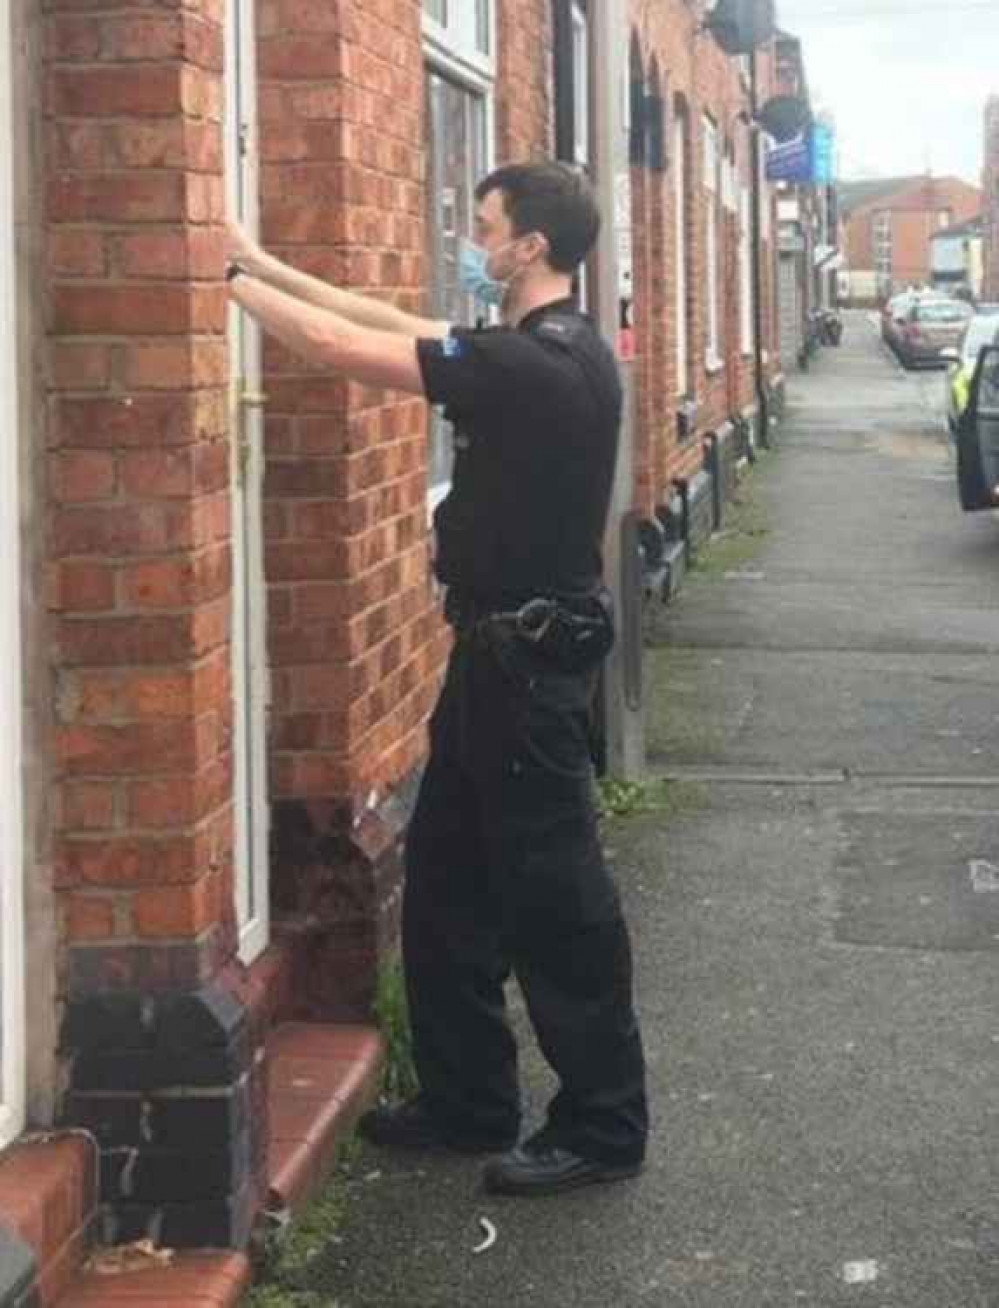 An officer in Richard Moon Street. (Picture: Crewe Police)